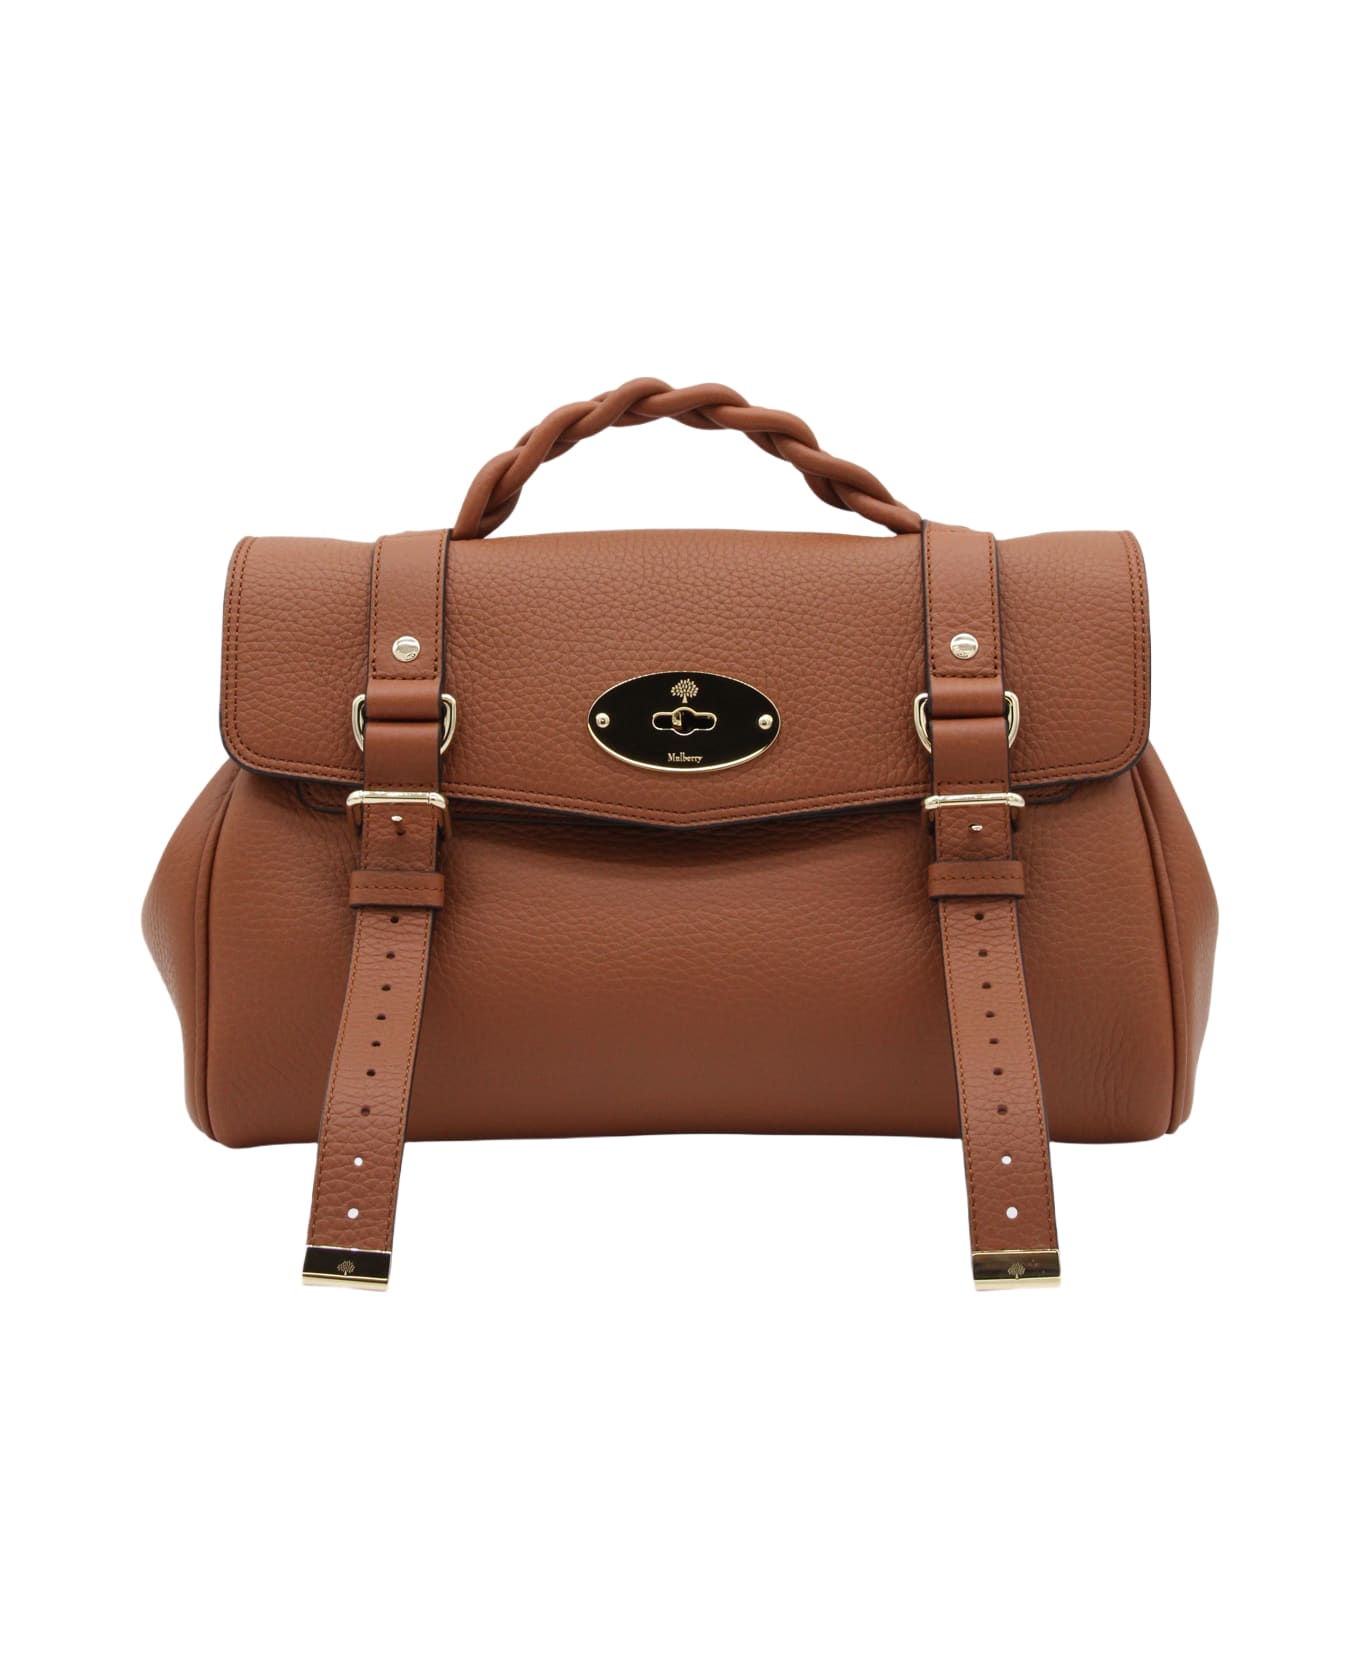 Mulberry Brown Leather Alexa Handle Bag - Chestnut トートバッグ